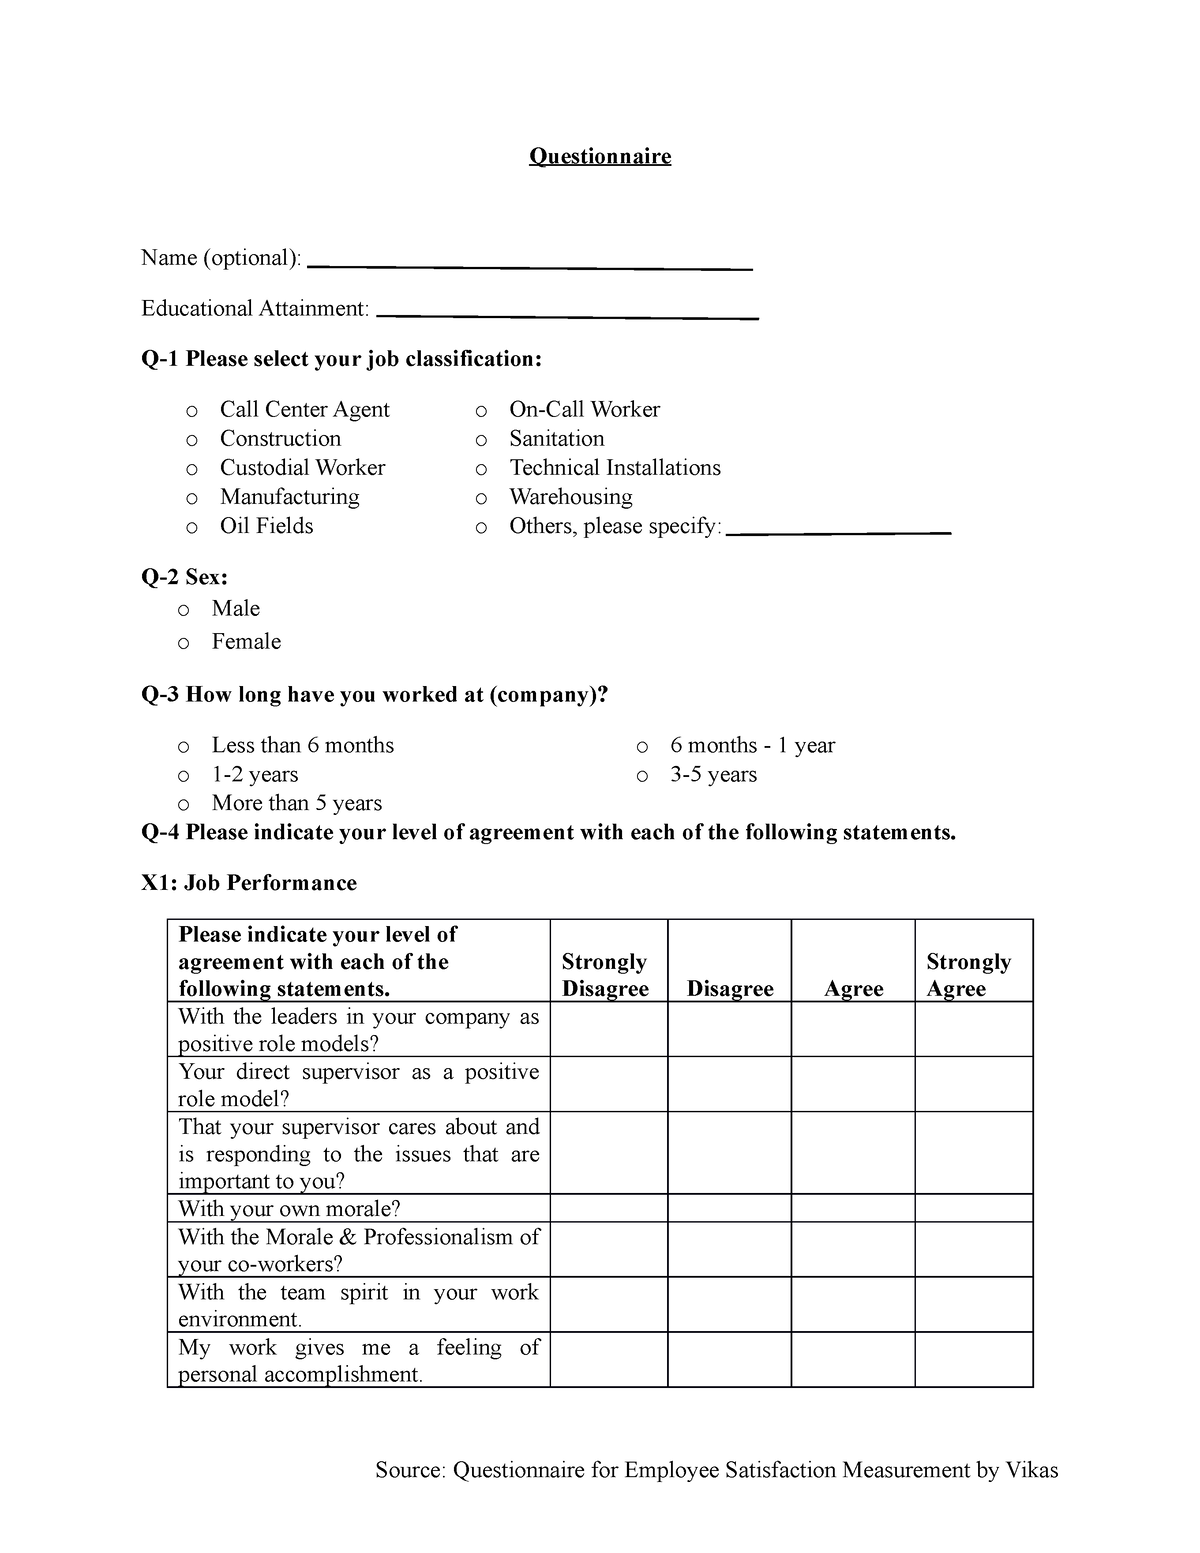 thesis sample questionnaire